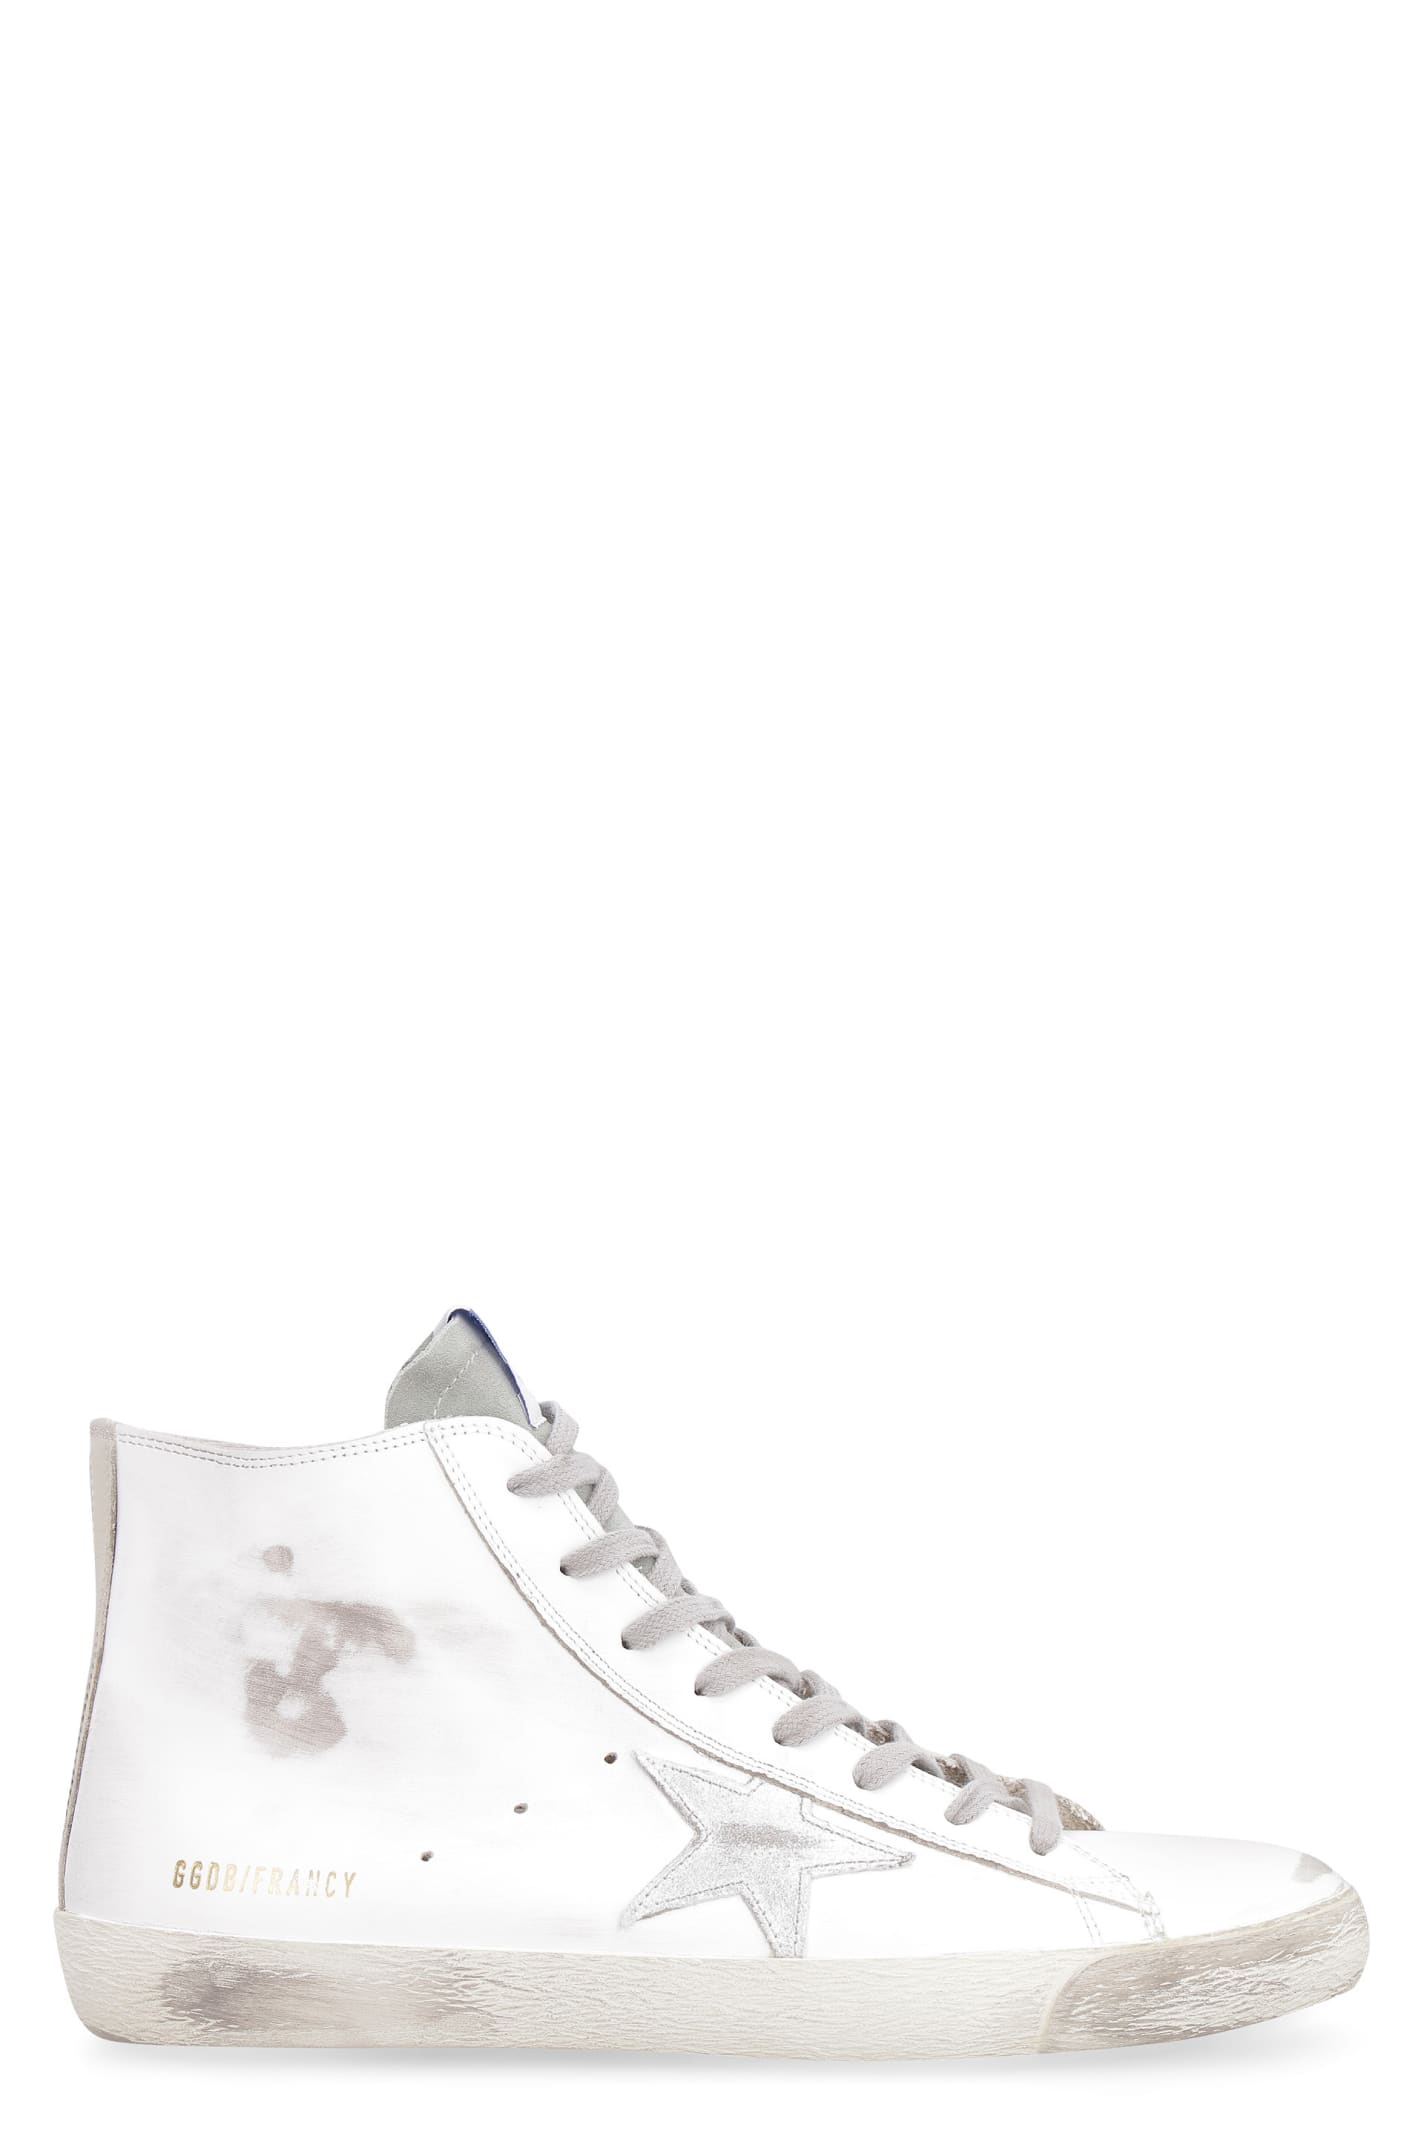 Golden Goose Francy Classic Leather High-top Sneakers